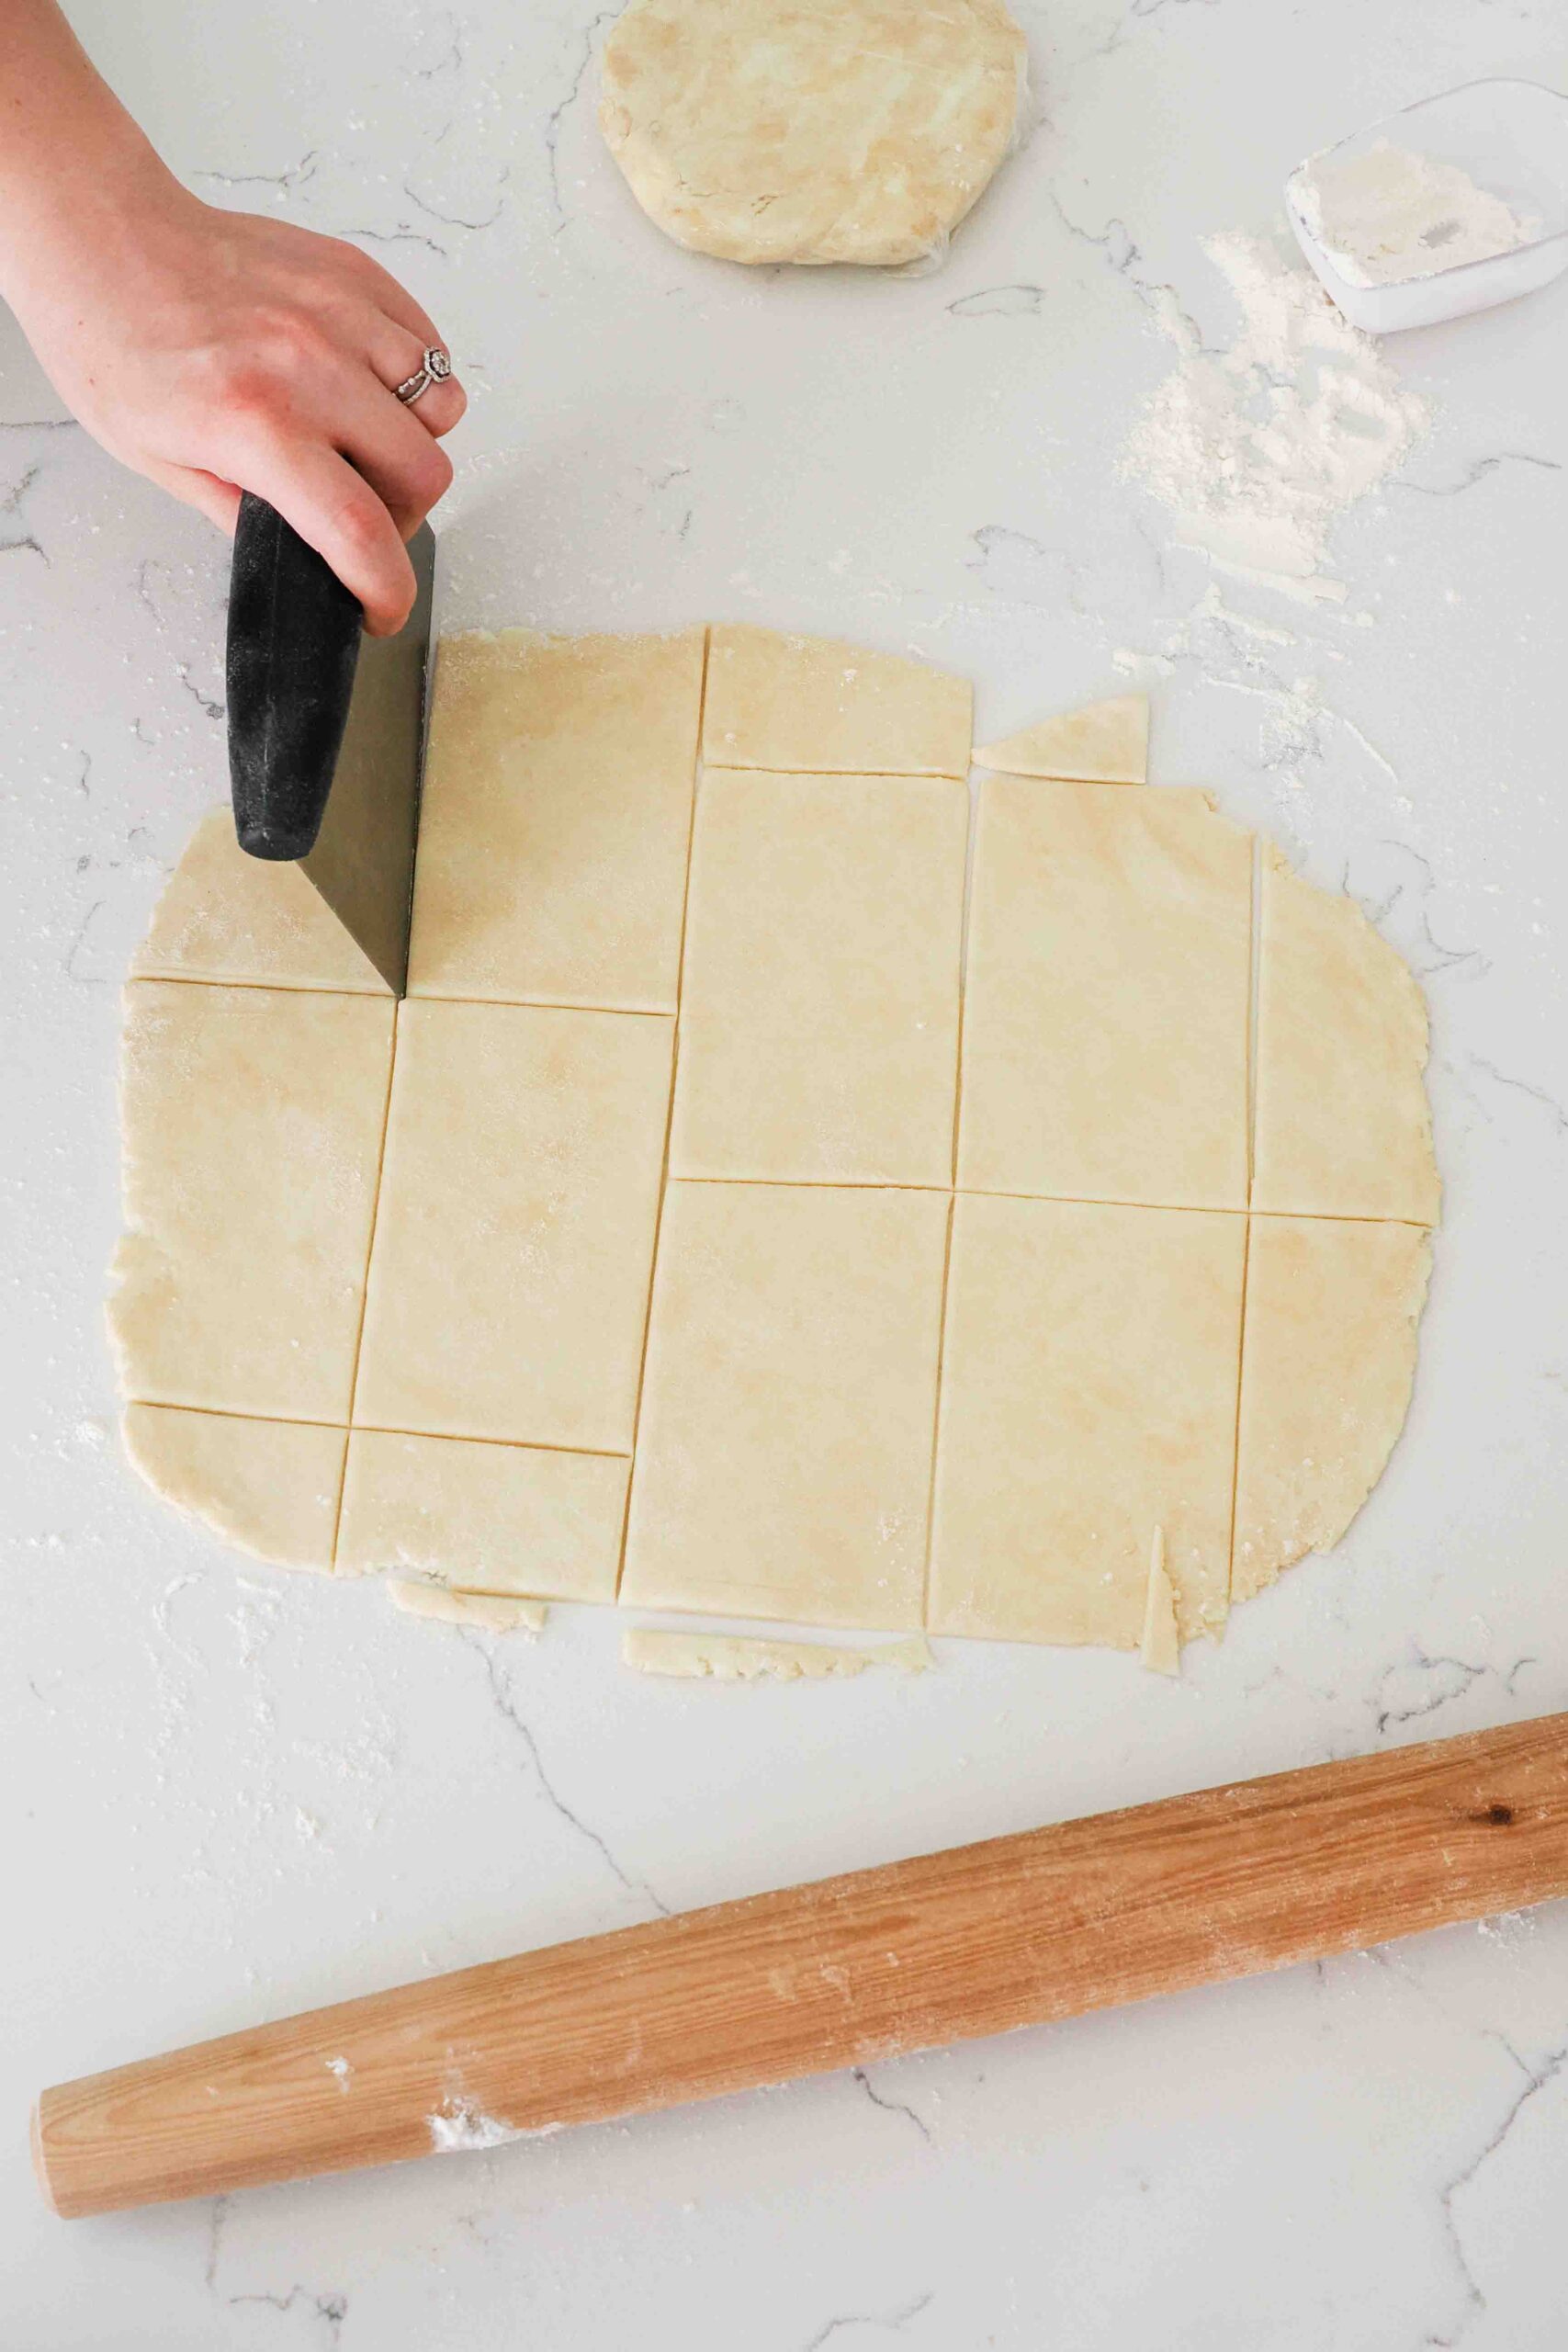 A hand uses a bench scraper to cut out rectangles of pie dough.